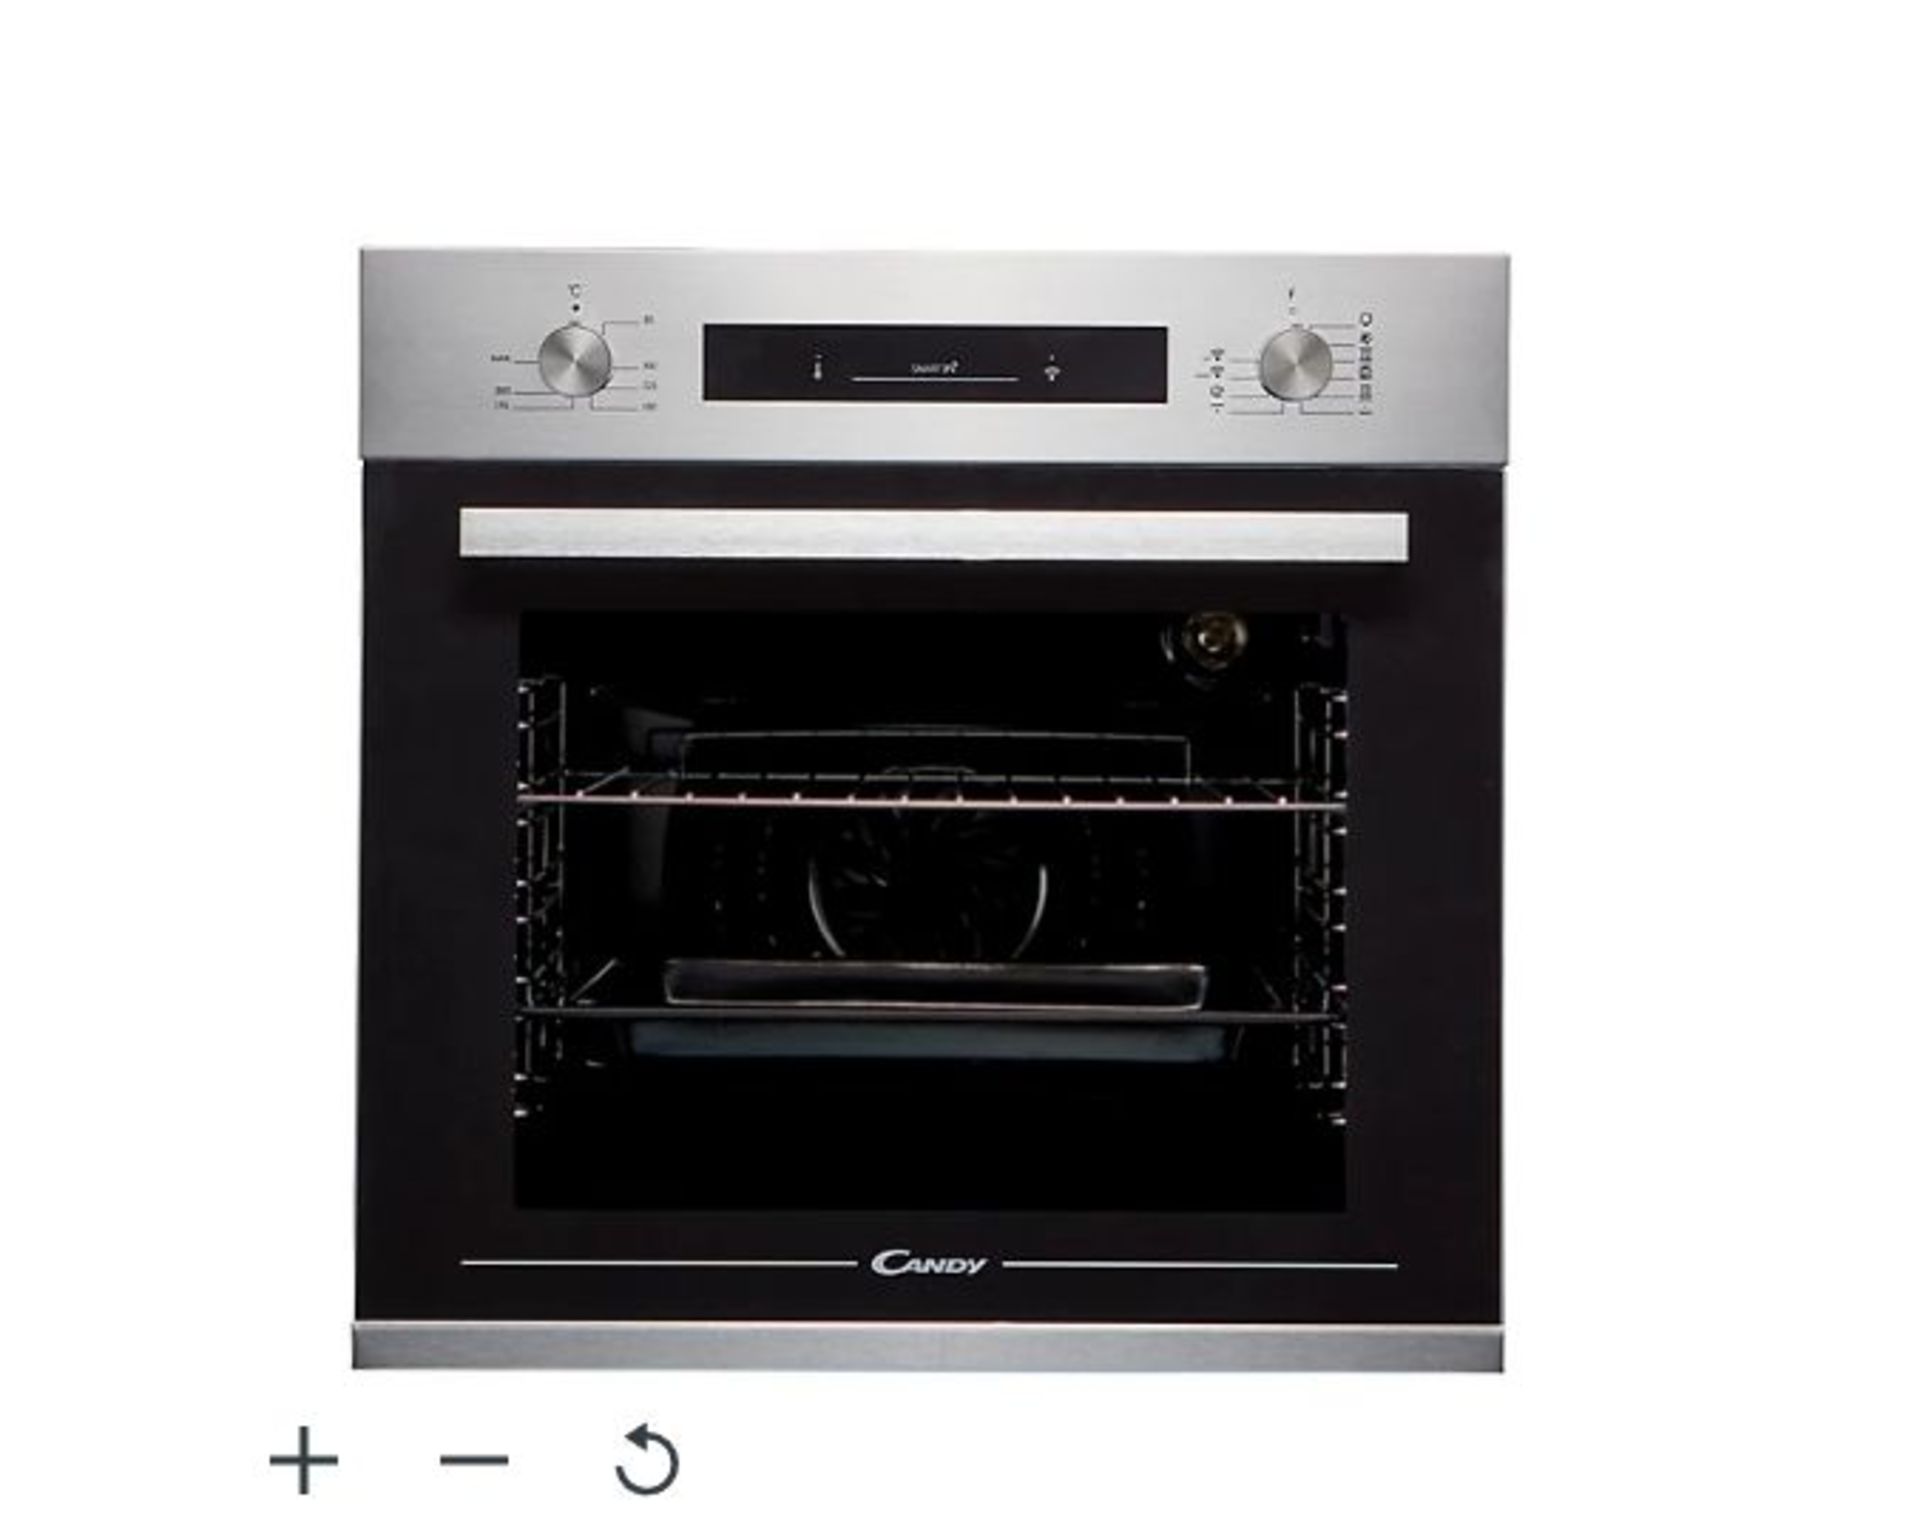 Candy FCP602X E0/E Built-in Single Oven - Black. - ER46. RRP £289.00. This 60cm multifunction oven